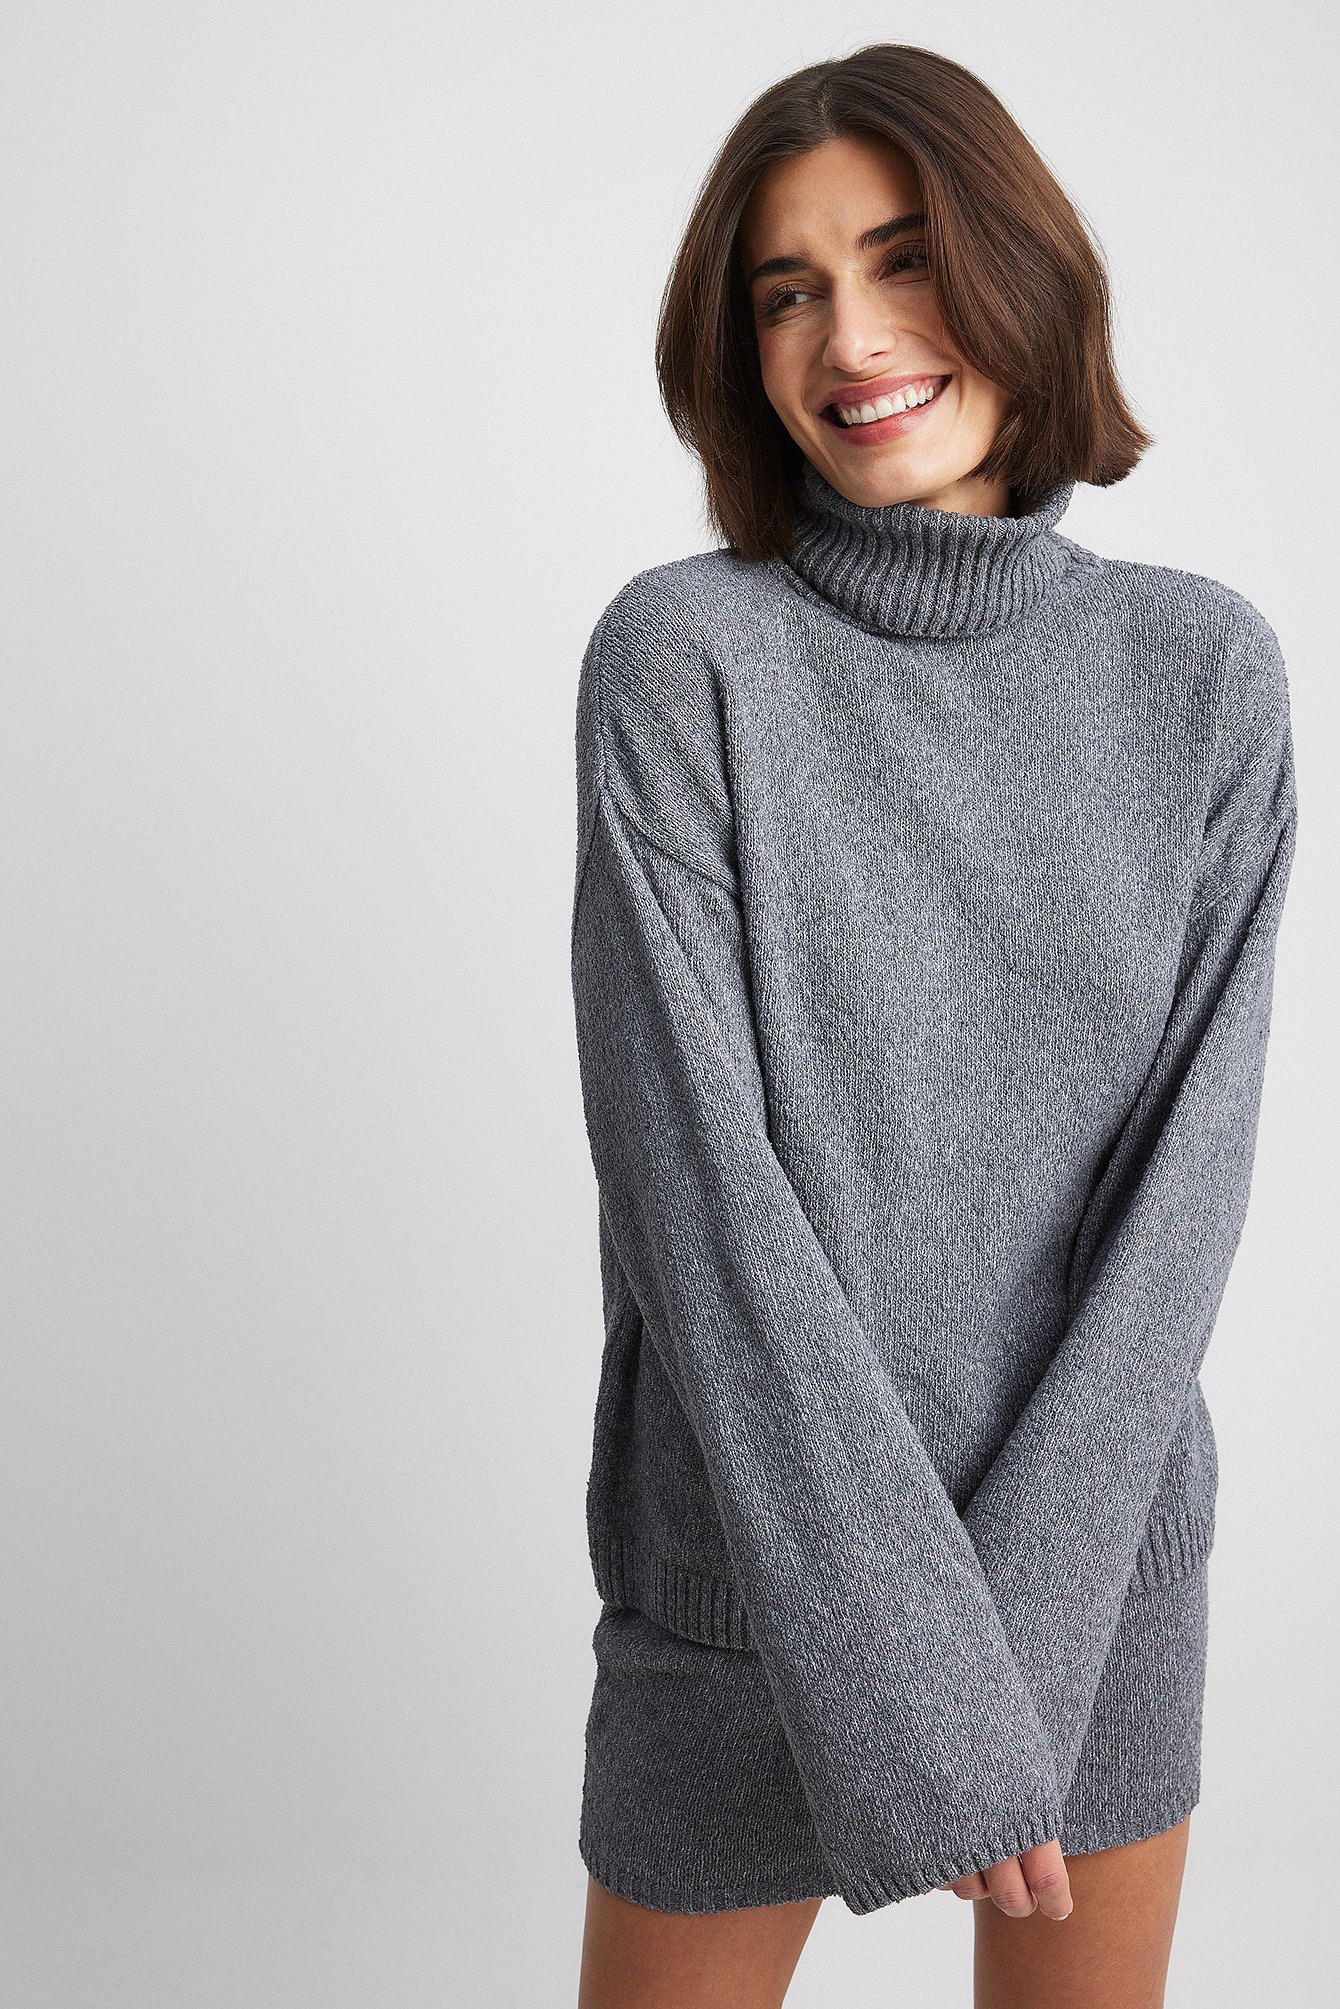 https://www.na-kd.com/globalassets/polo_knitted_sweater-1757-000080-0008_1472.jpg?ref=CACBDB8A6A